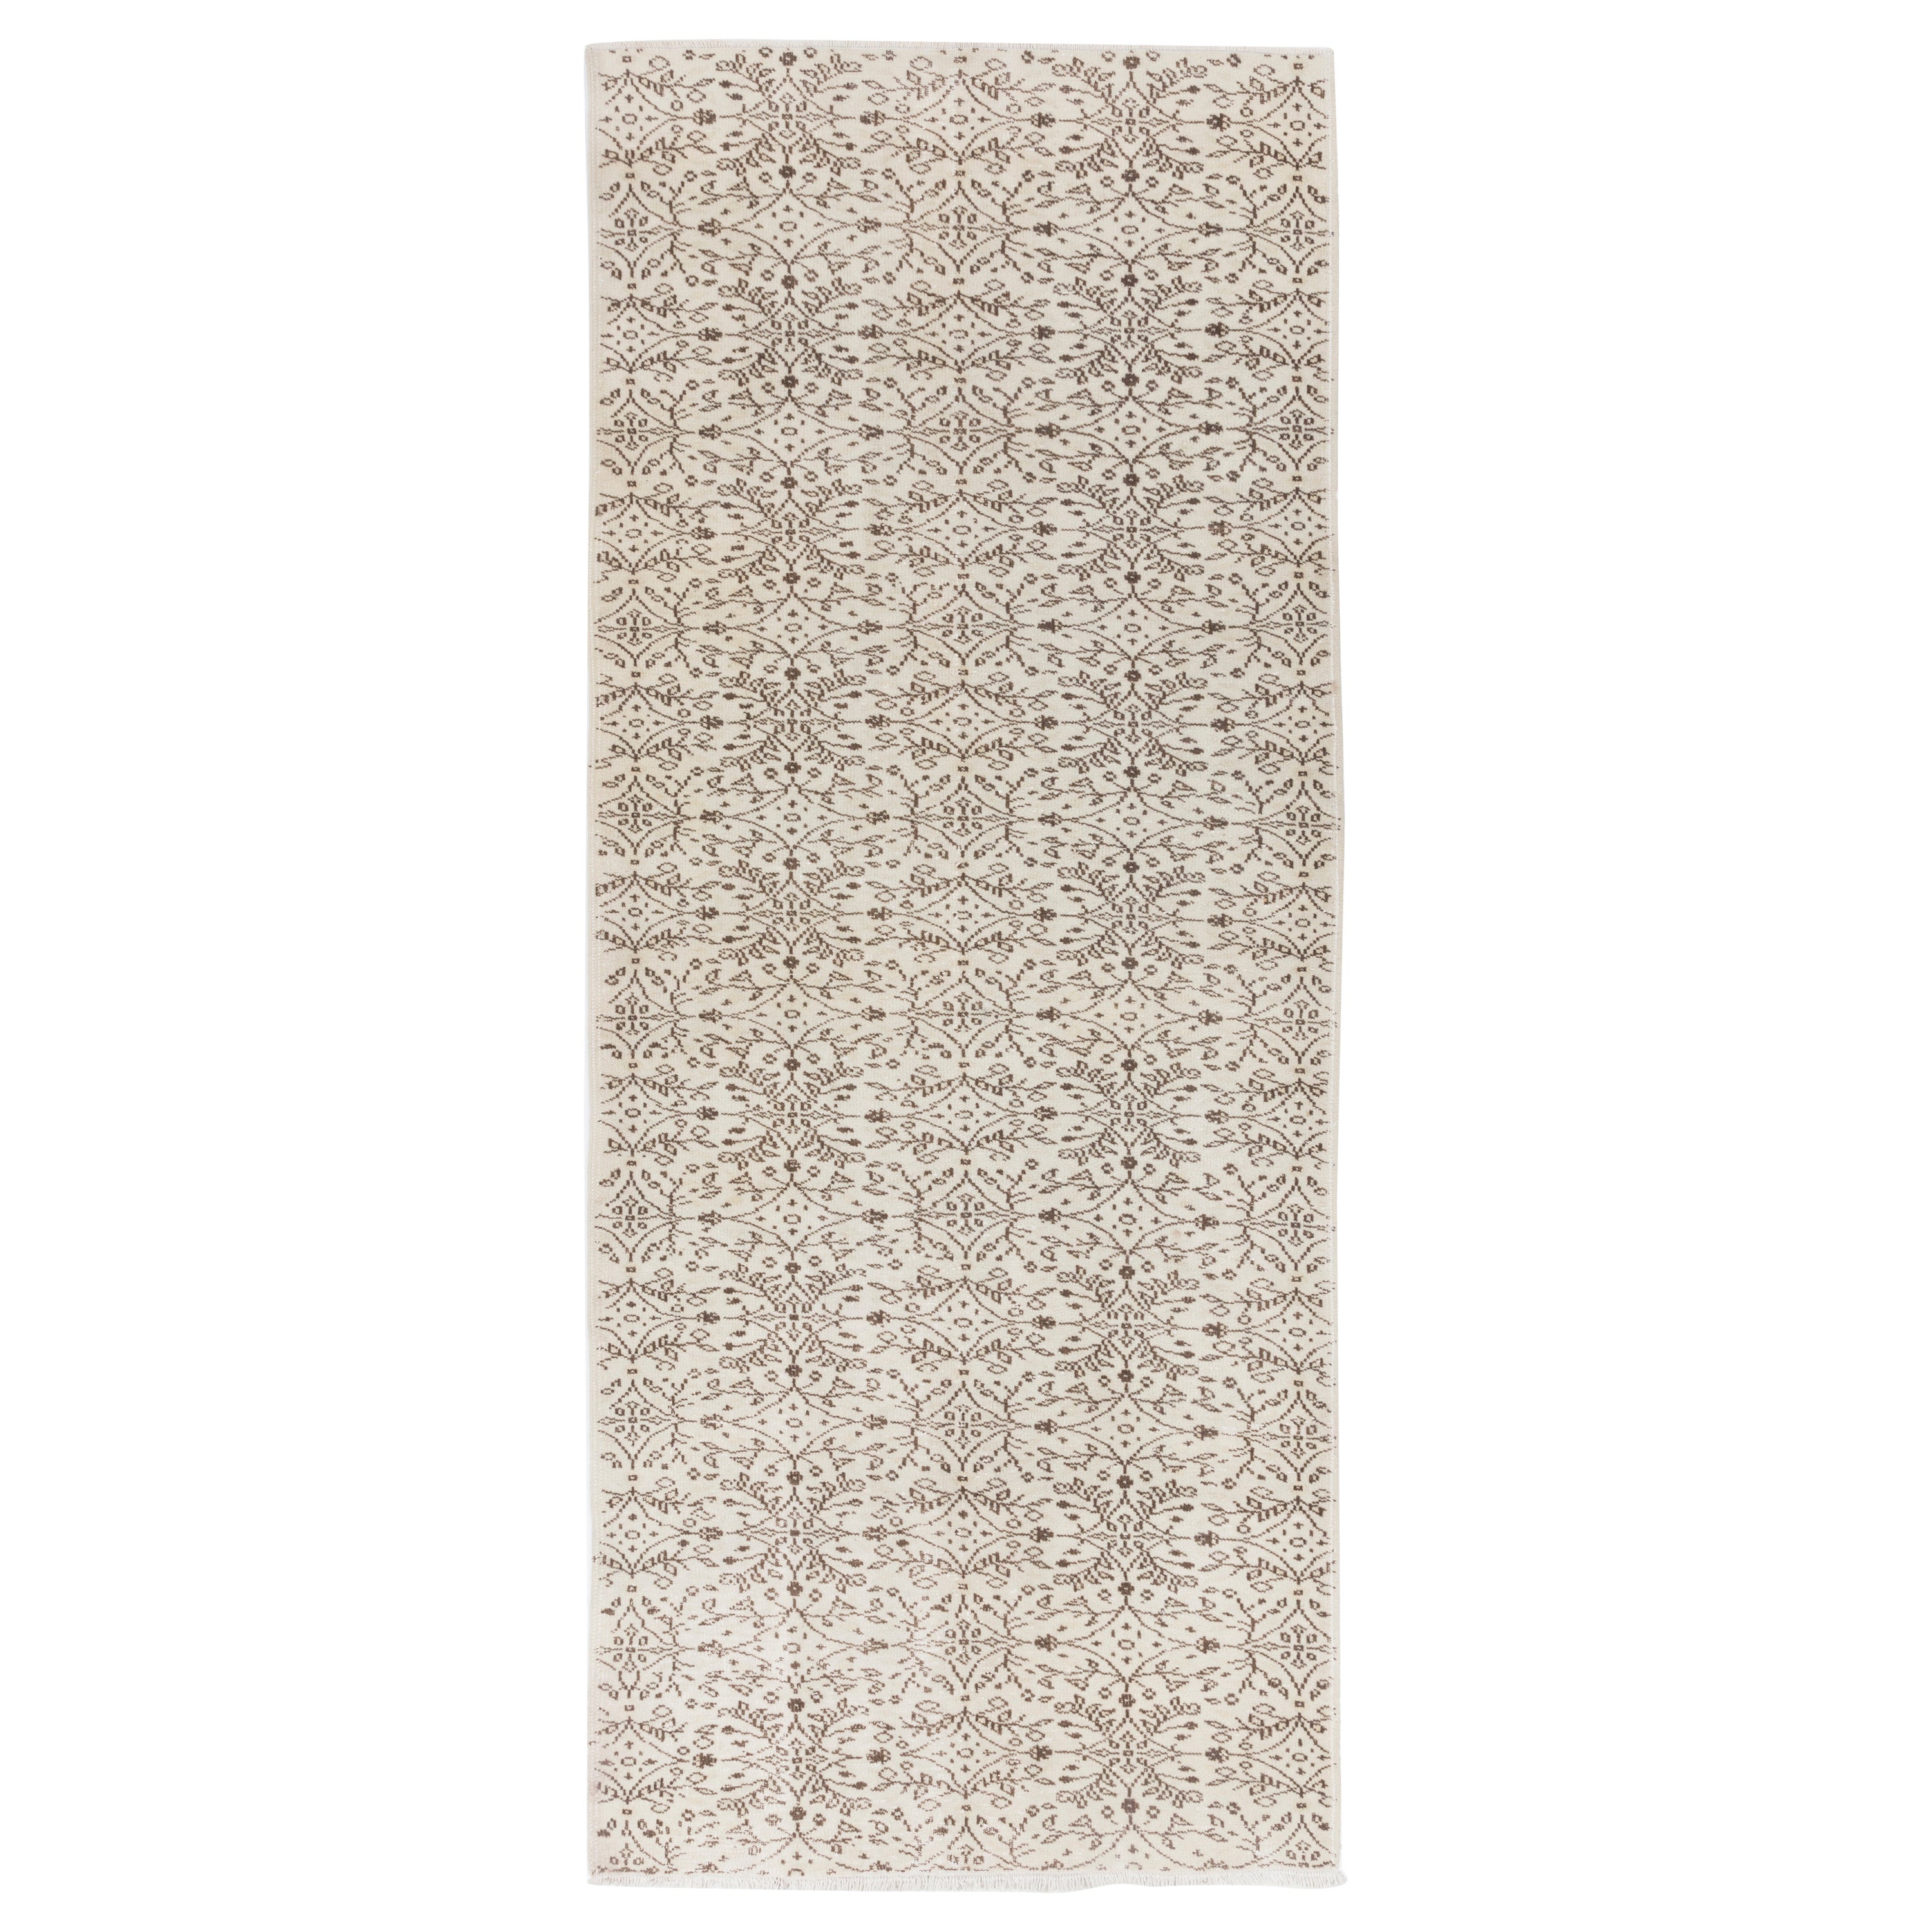 4.8x11.4 Ft Vintage Handmade Anatolian Wool Runner Rug in Ivory and Brown